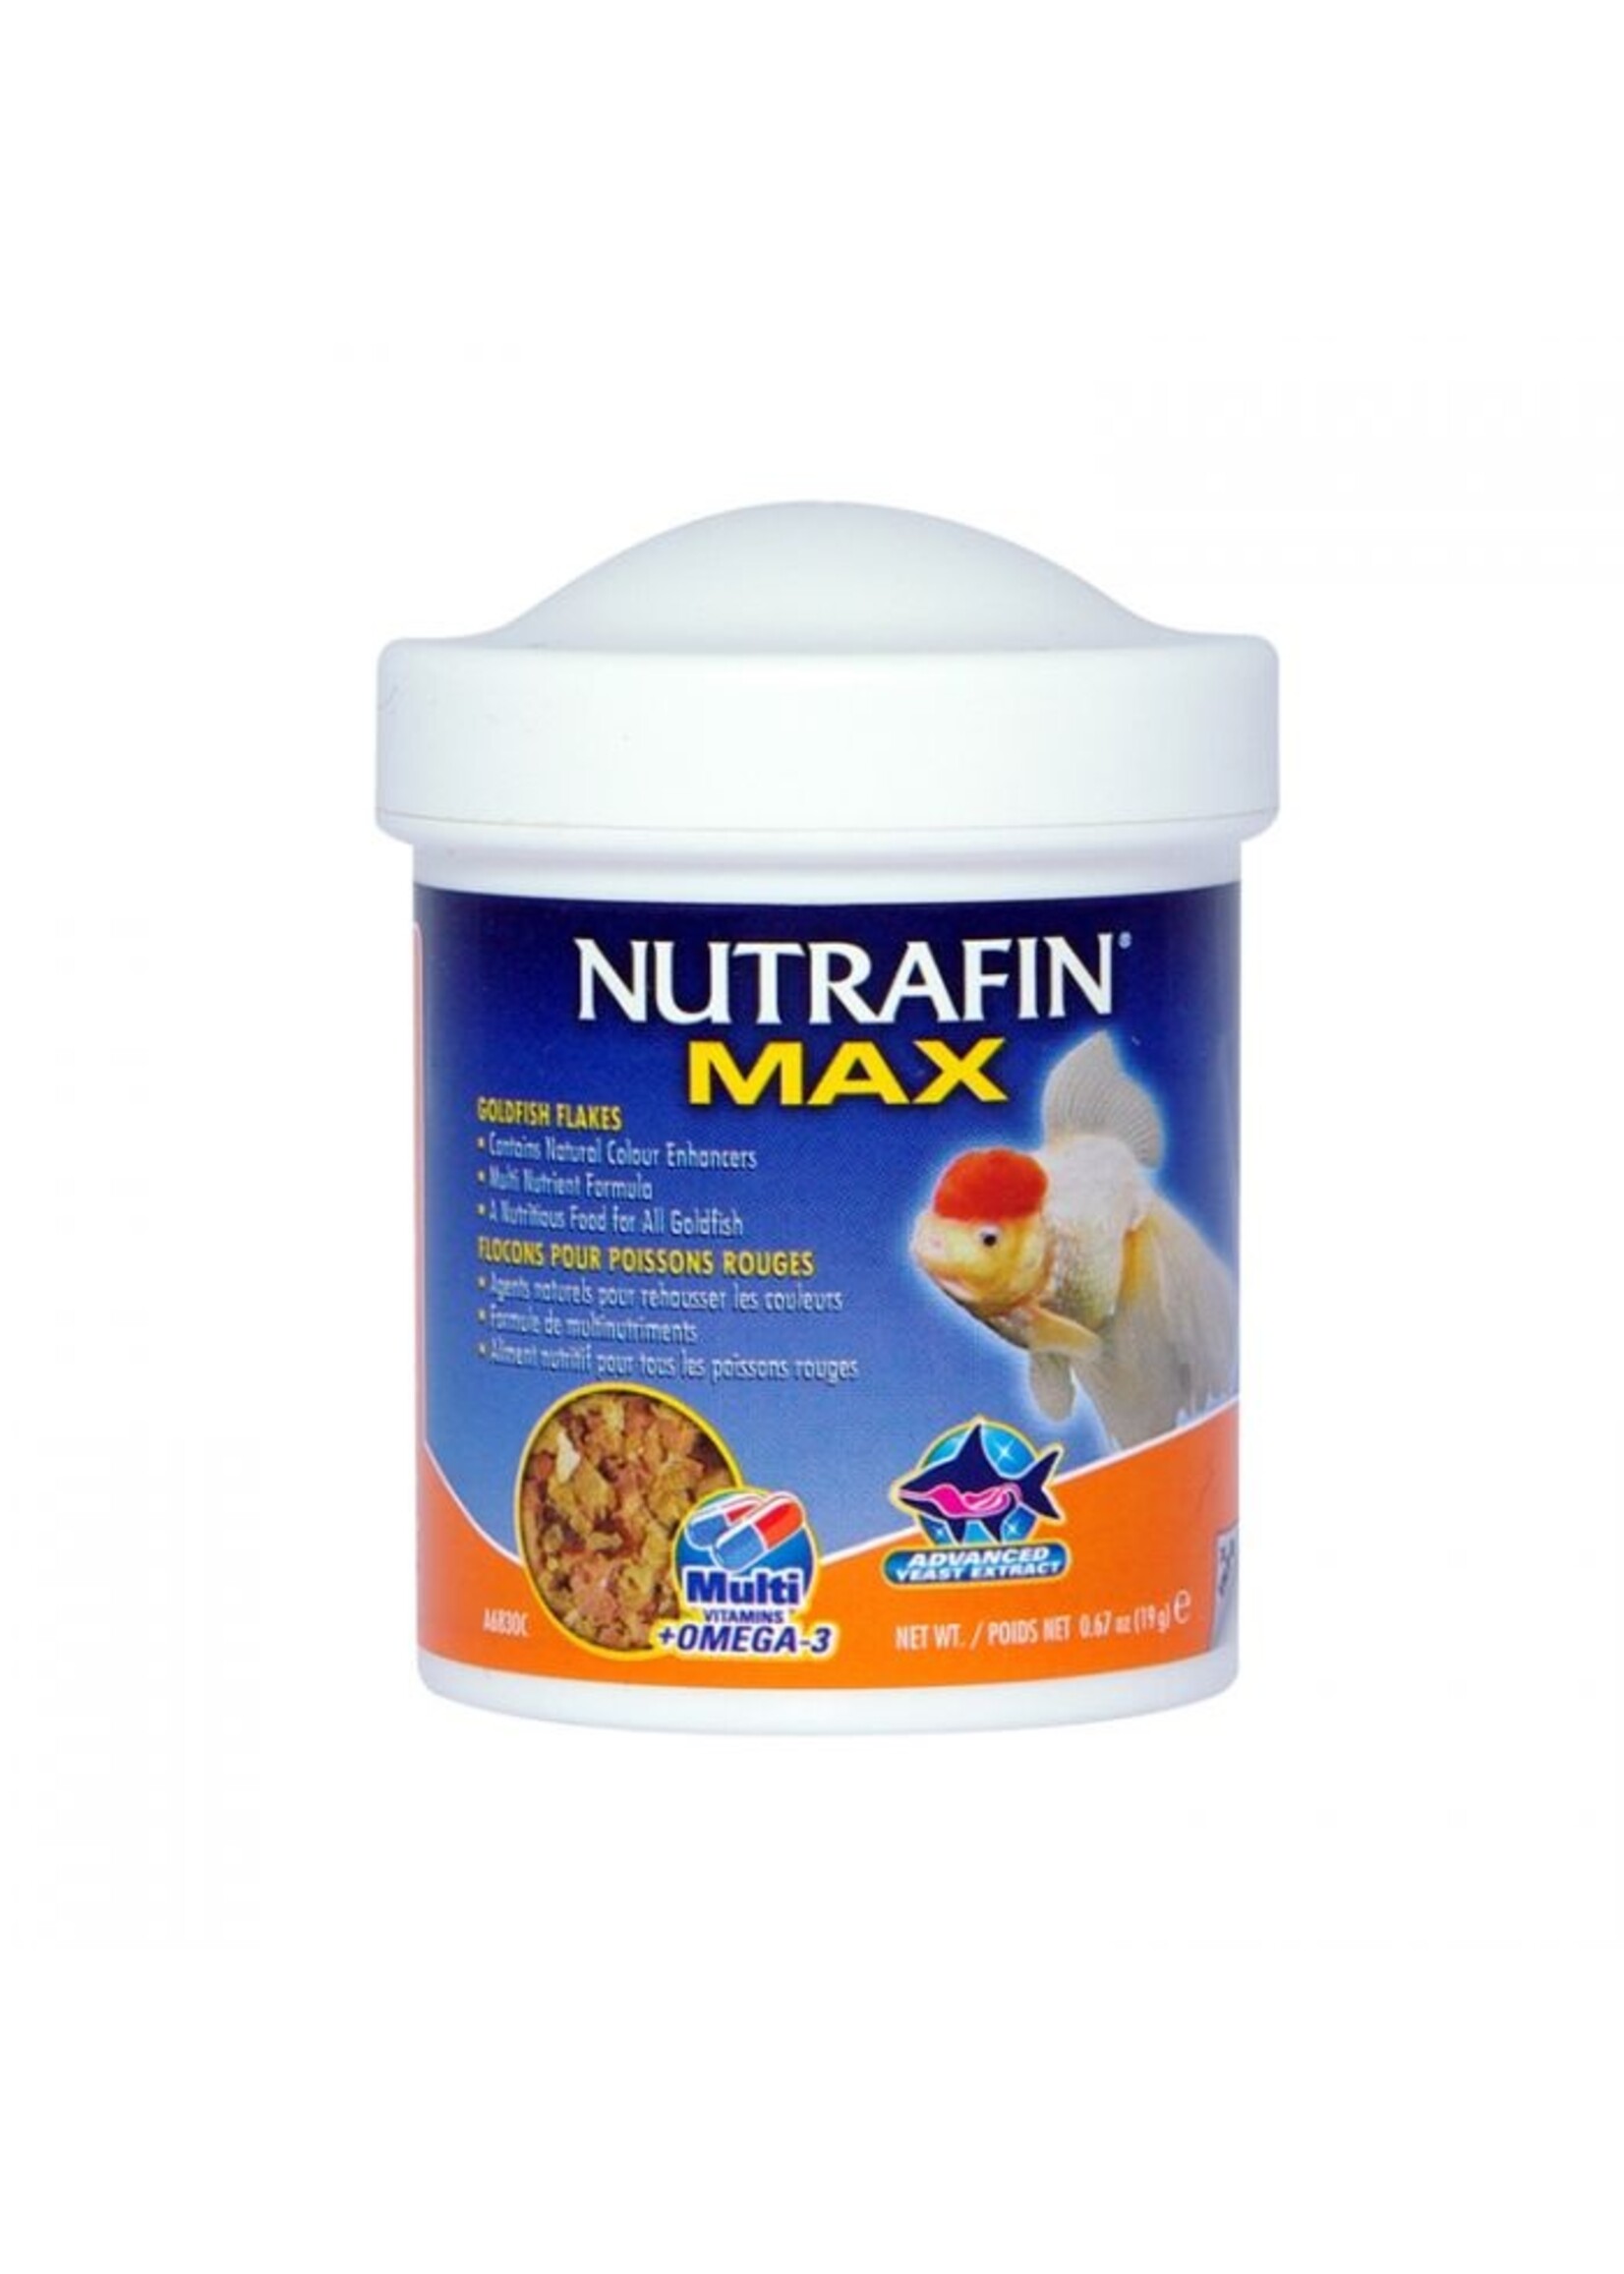 Nutrafin Nutrafin Max Goldfish Flakes